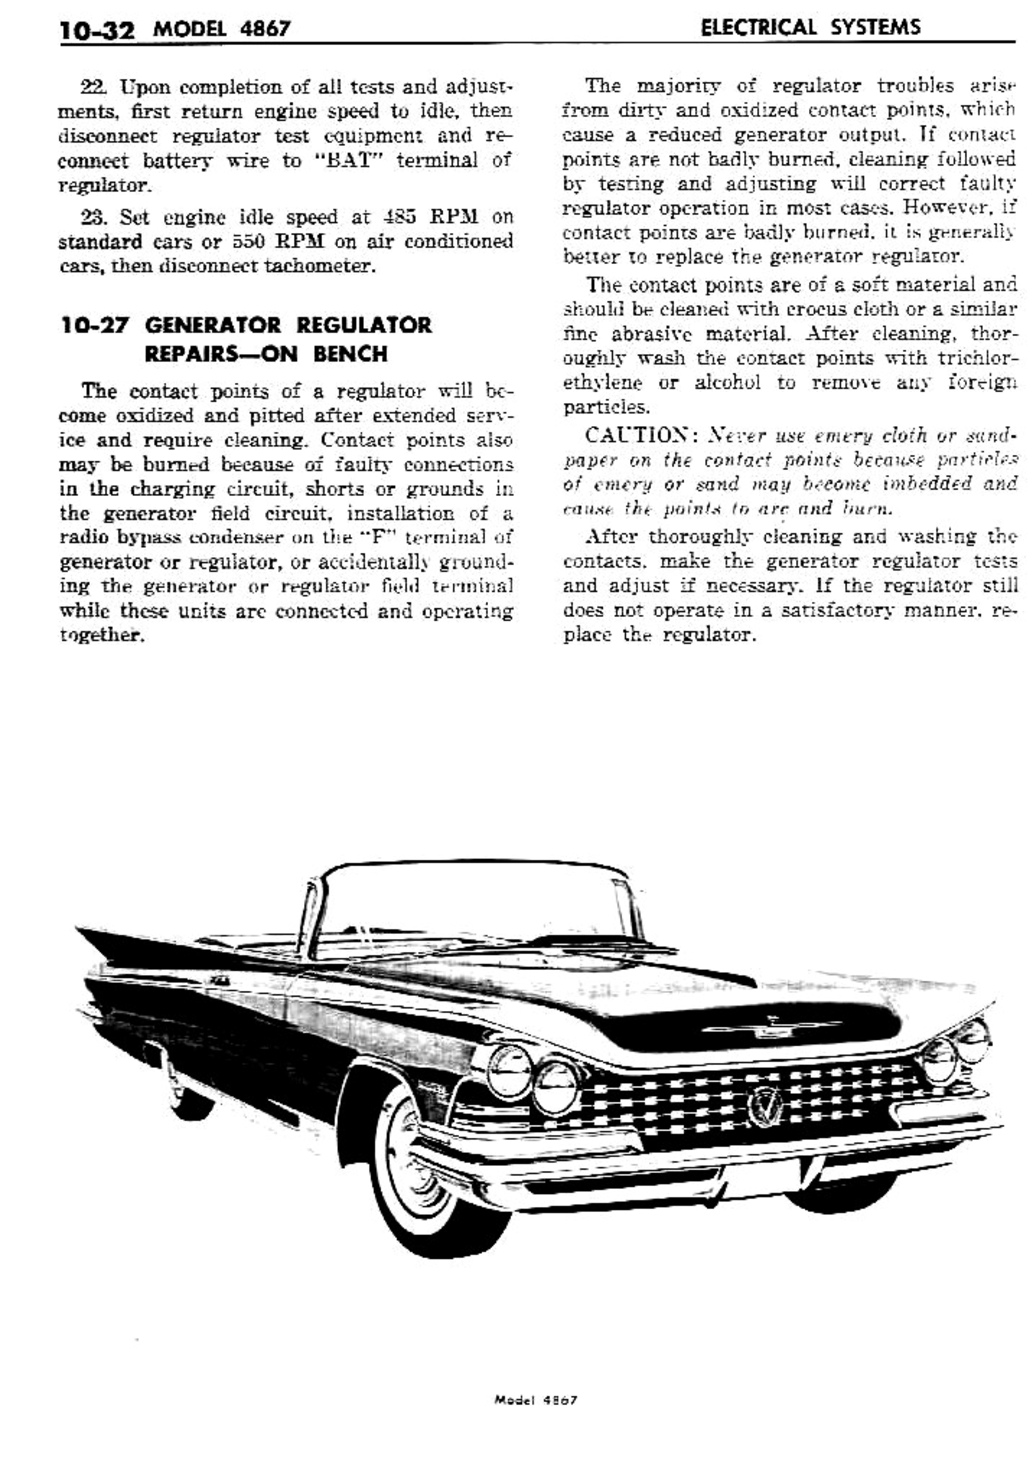 n_11 1959 Buick Shop Manual - Electrical Systems-032-032.jpg